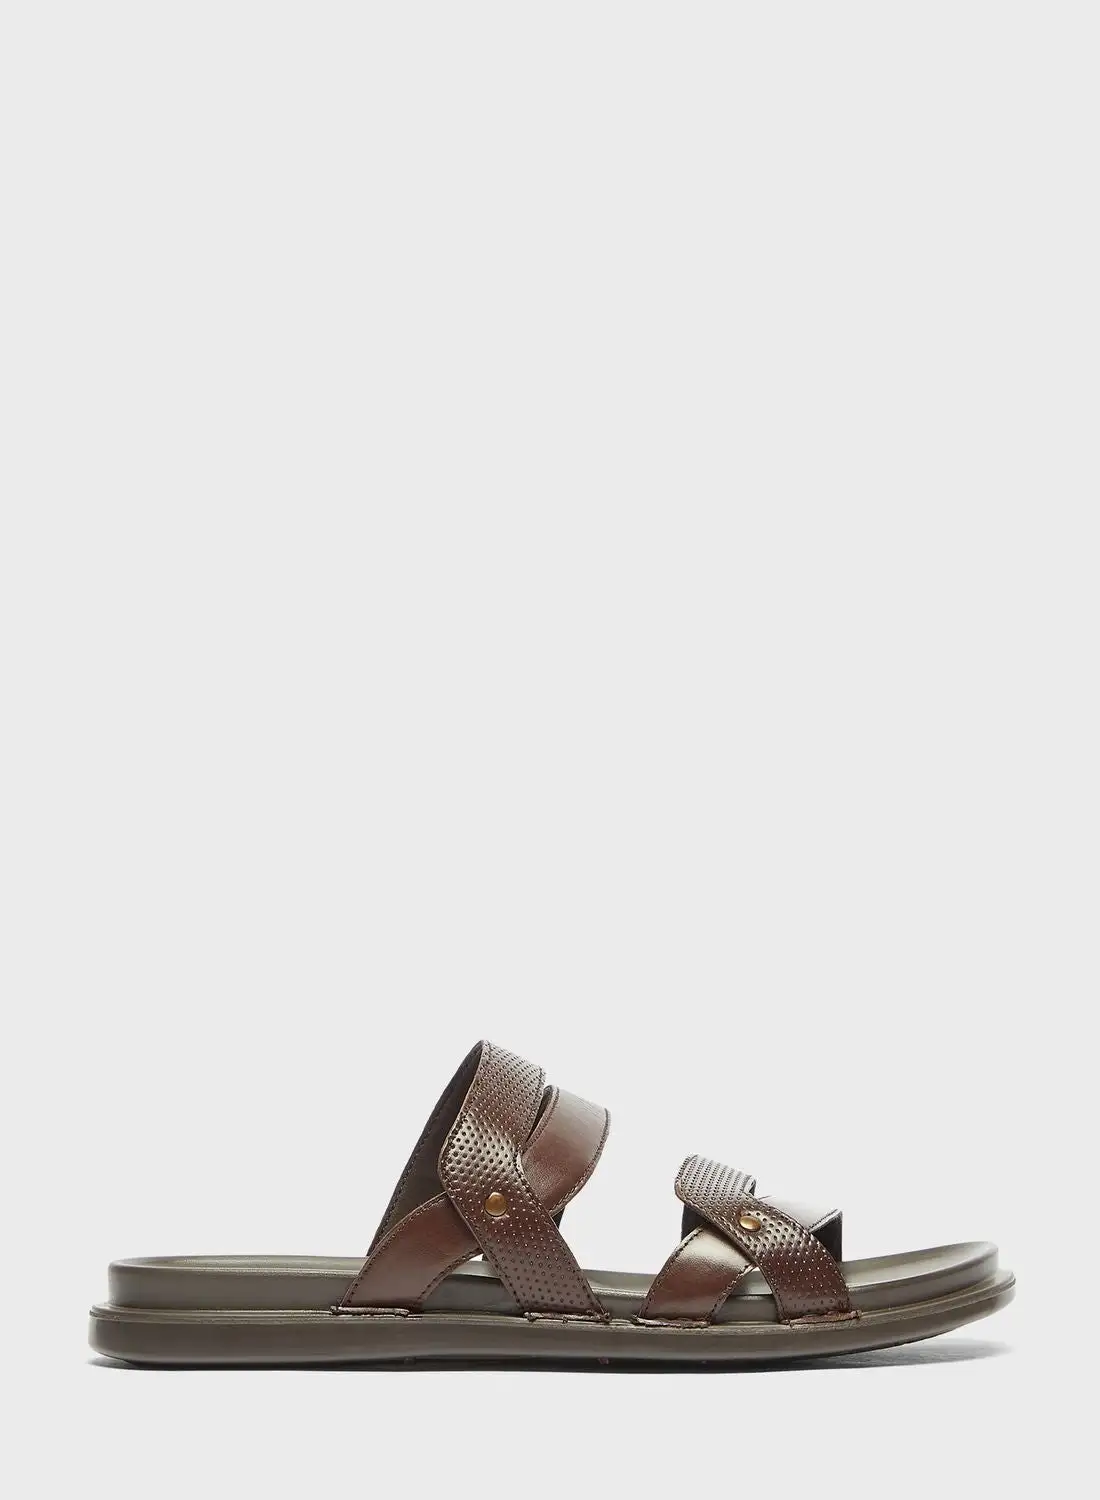 LBL by Shoexpress Casual Cross Strap Sandals